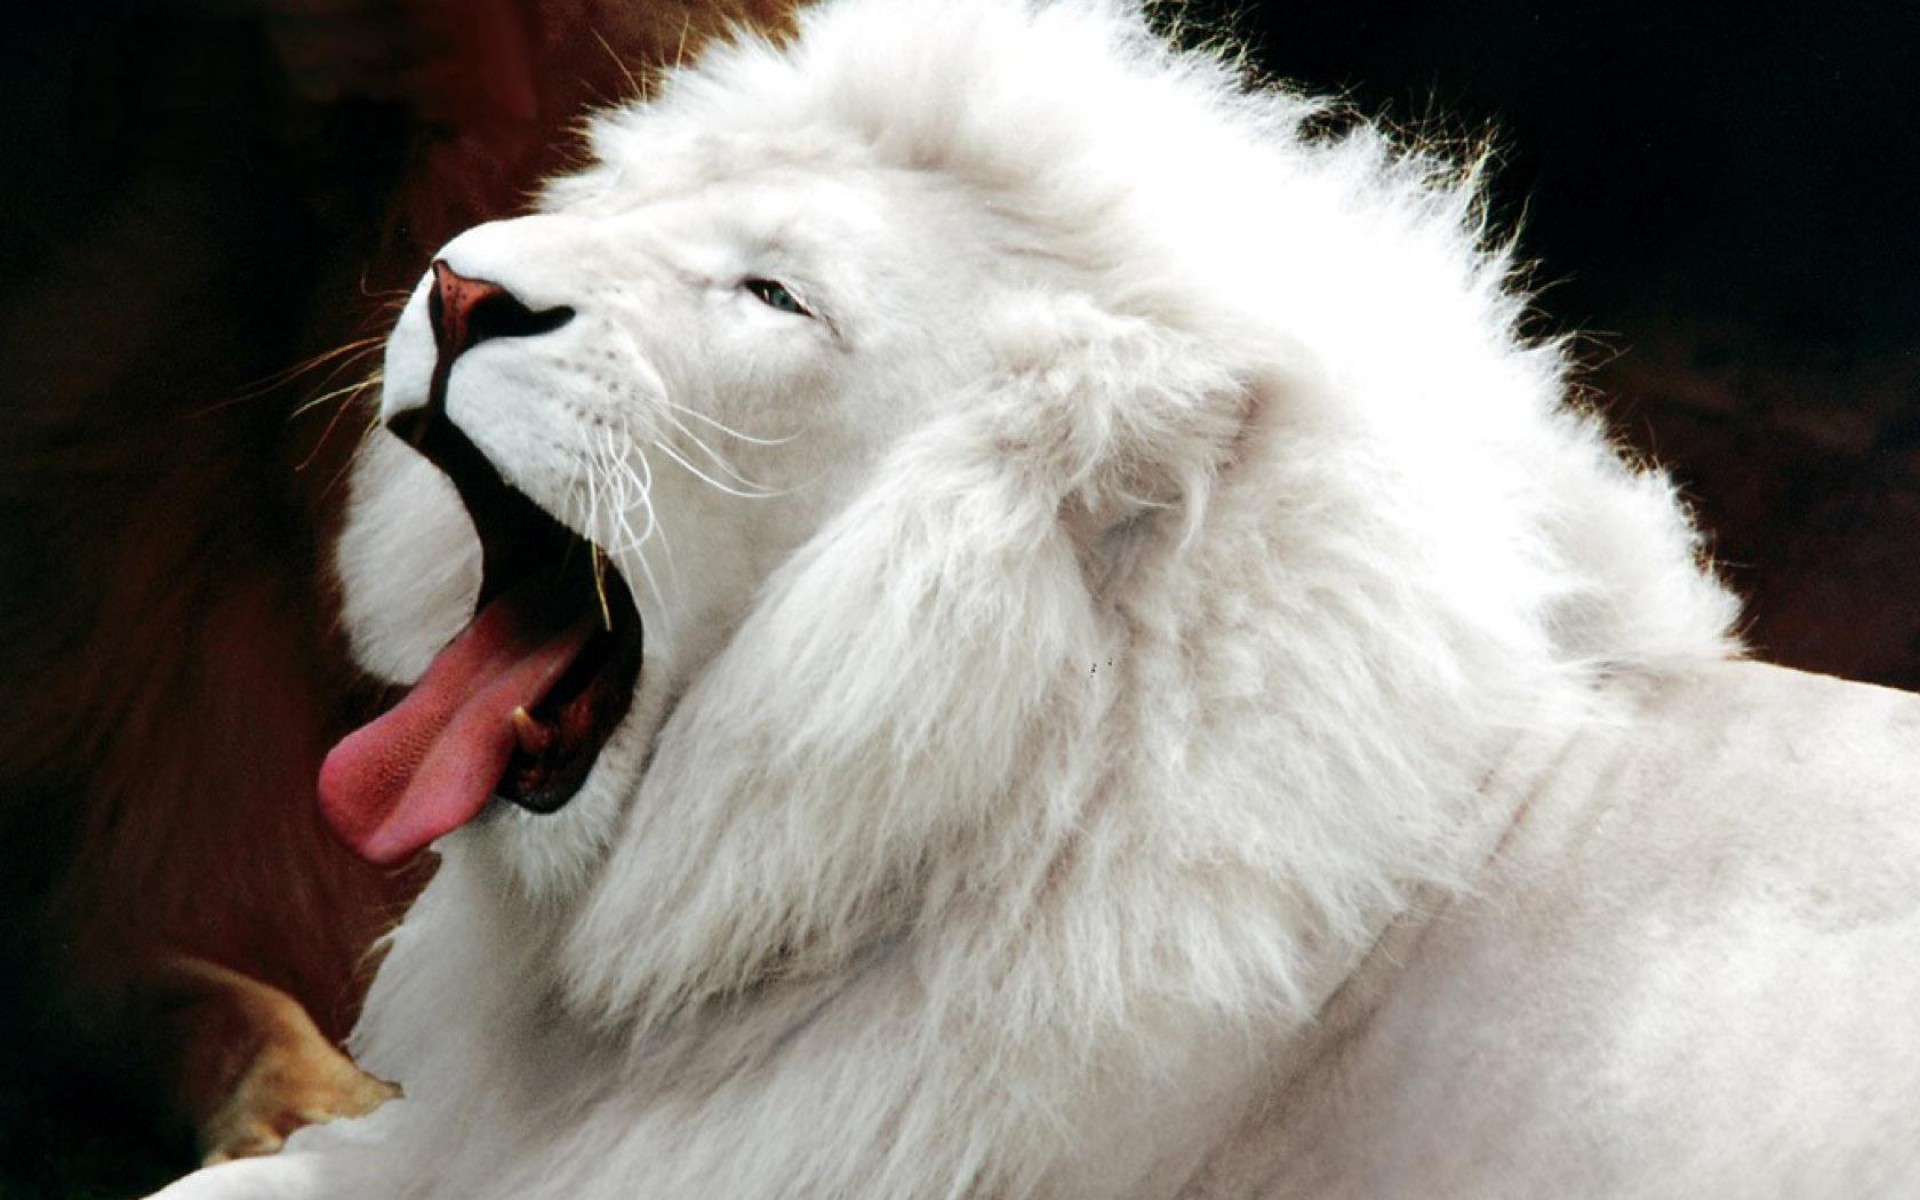 angry white lion wallpaper